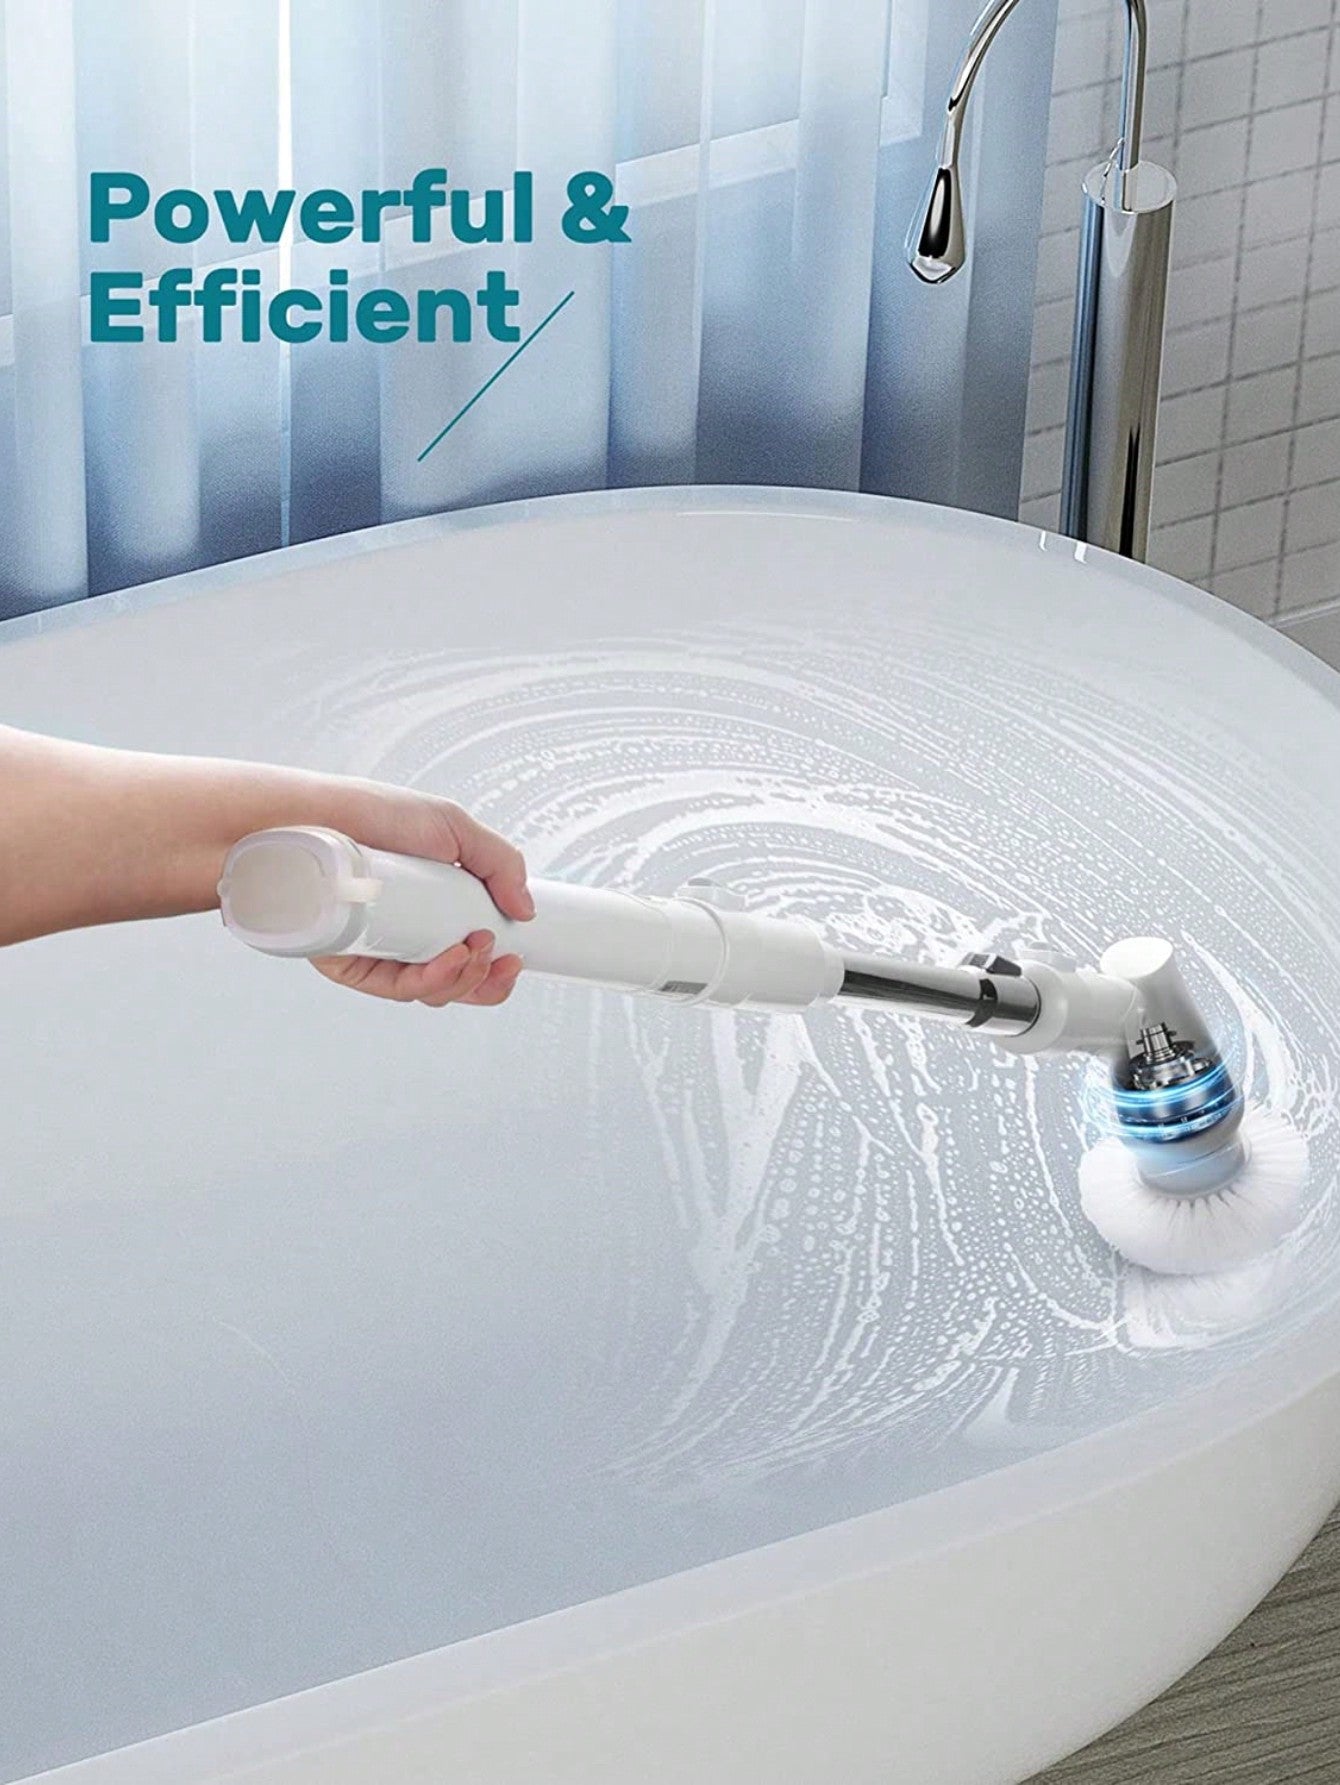 1 Set Plug-in Charge Wireless White Electric Spinning Floor Scrubber, With Extendable Handle Shower Scrubber, With 3 Replaceable Brush Head Bathtub Tile Floor Scrubber, 60 Minutes Running Time, 350 Rpm, With High Torque Motor, Suitable For Bathroom,-White-5